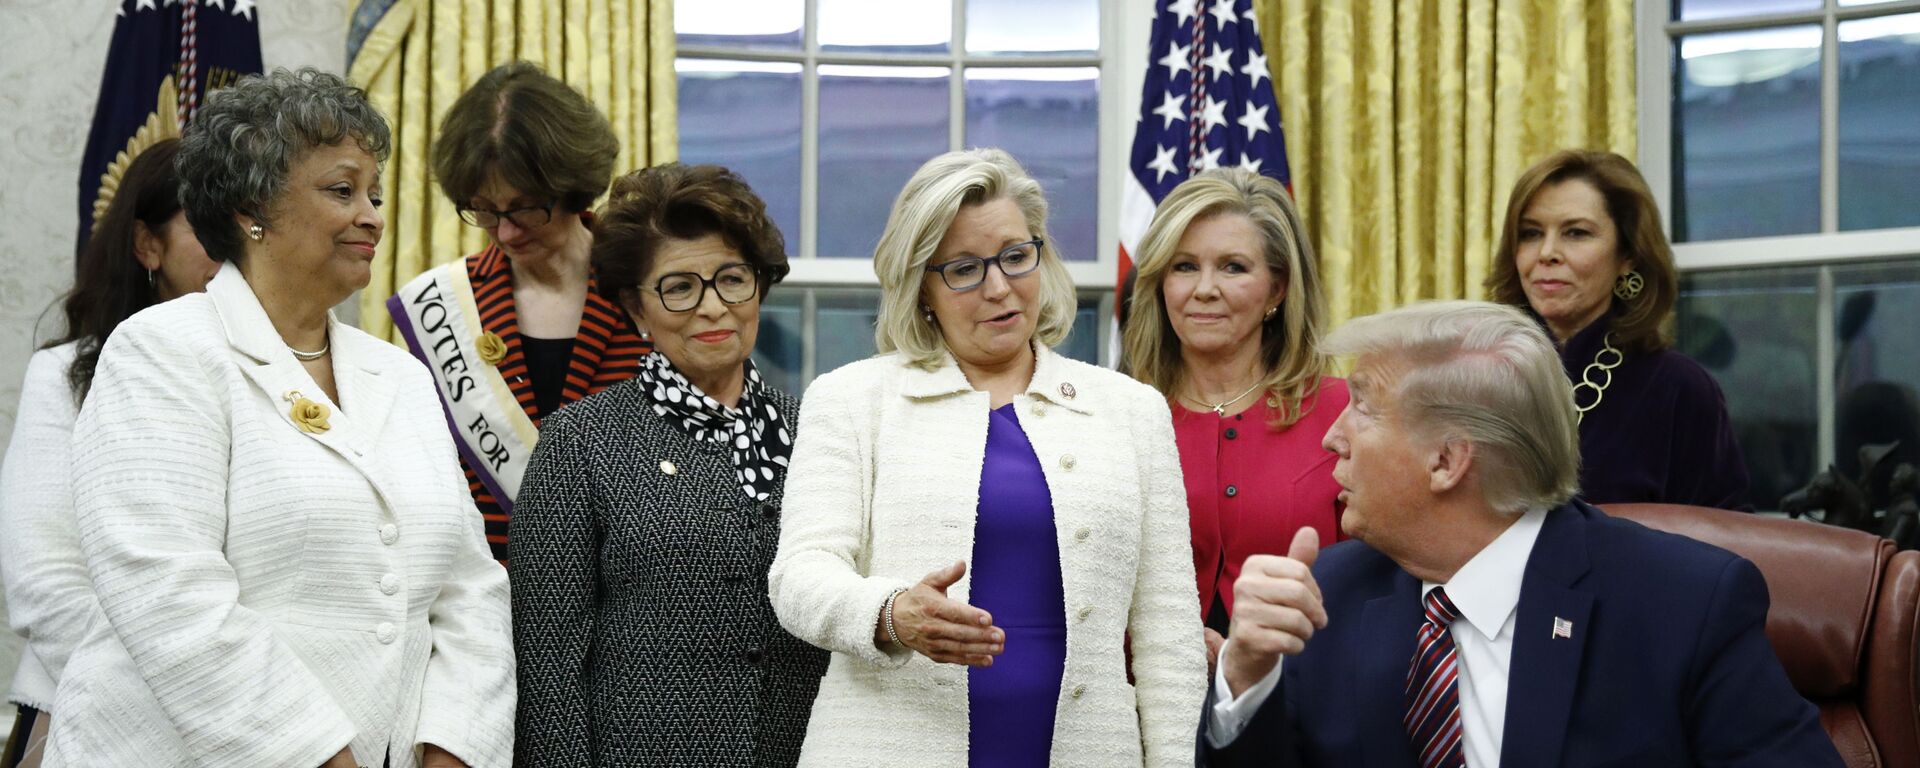 Rep. Liz Cheney, R-Wyo., center, speaks with President Donald Trump during a bill signing ceremony for the Women's Suffrage Centennial Commemorative Coin Act in the Oval Office of the White House, Monday, Nov. 25, 2019, in Washington. - Sputnik International, 1920, 08.05.2021